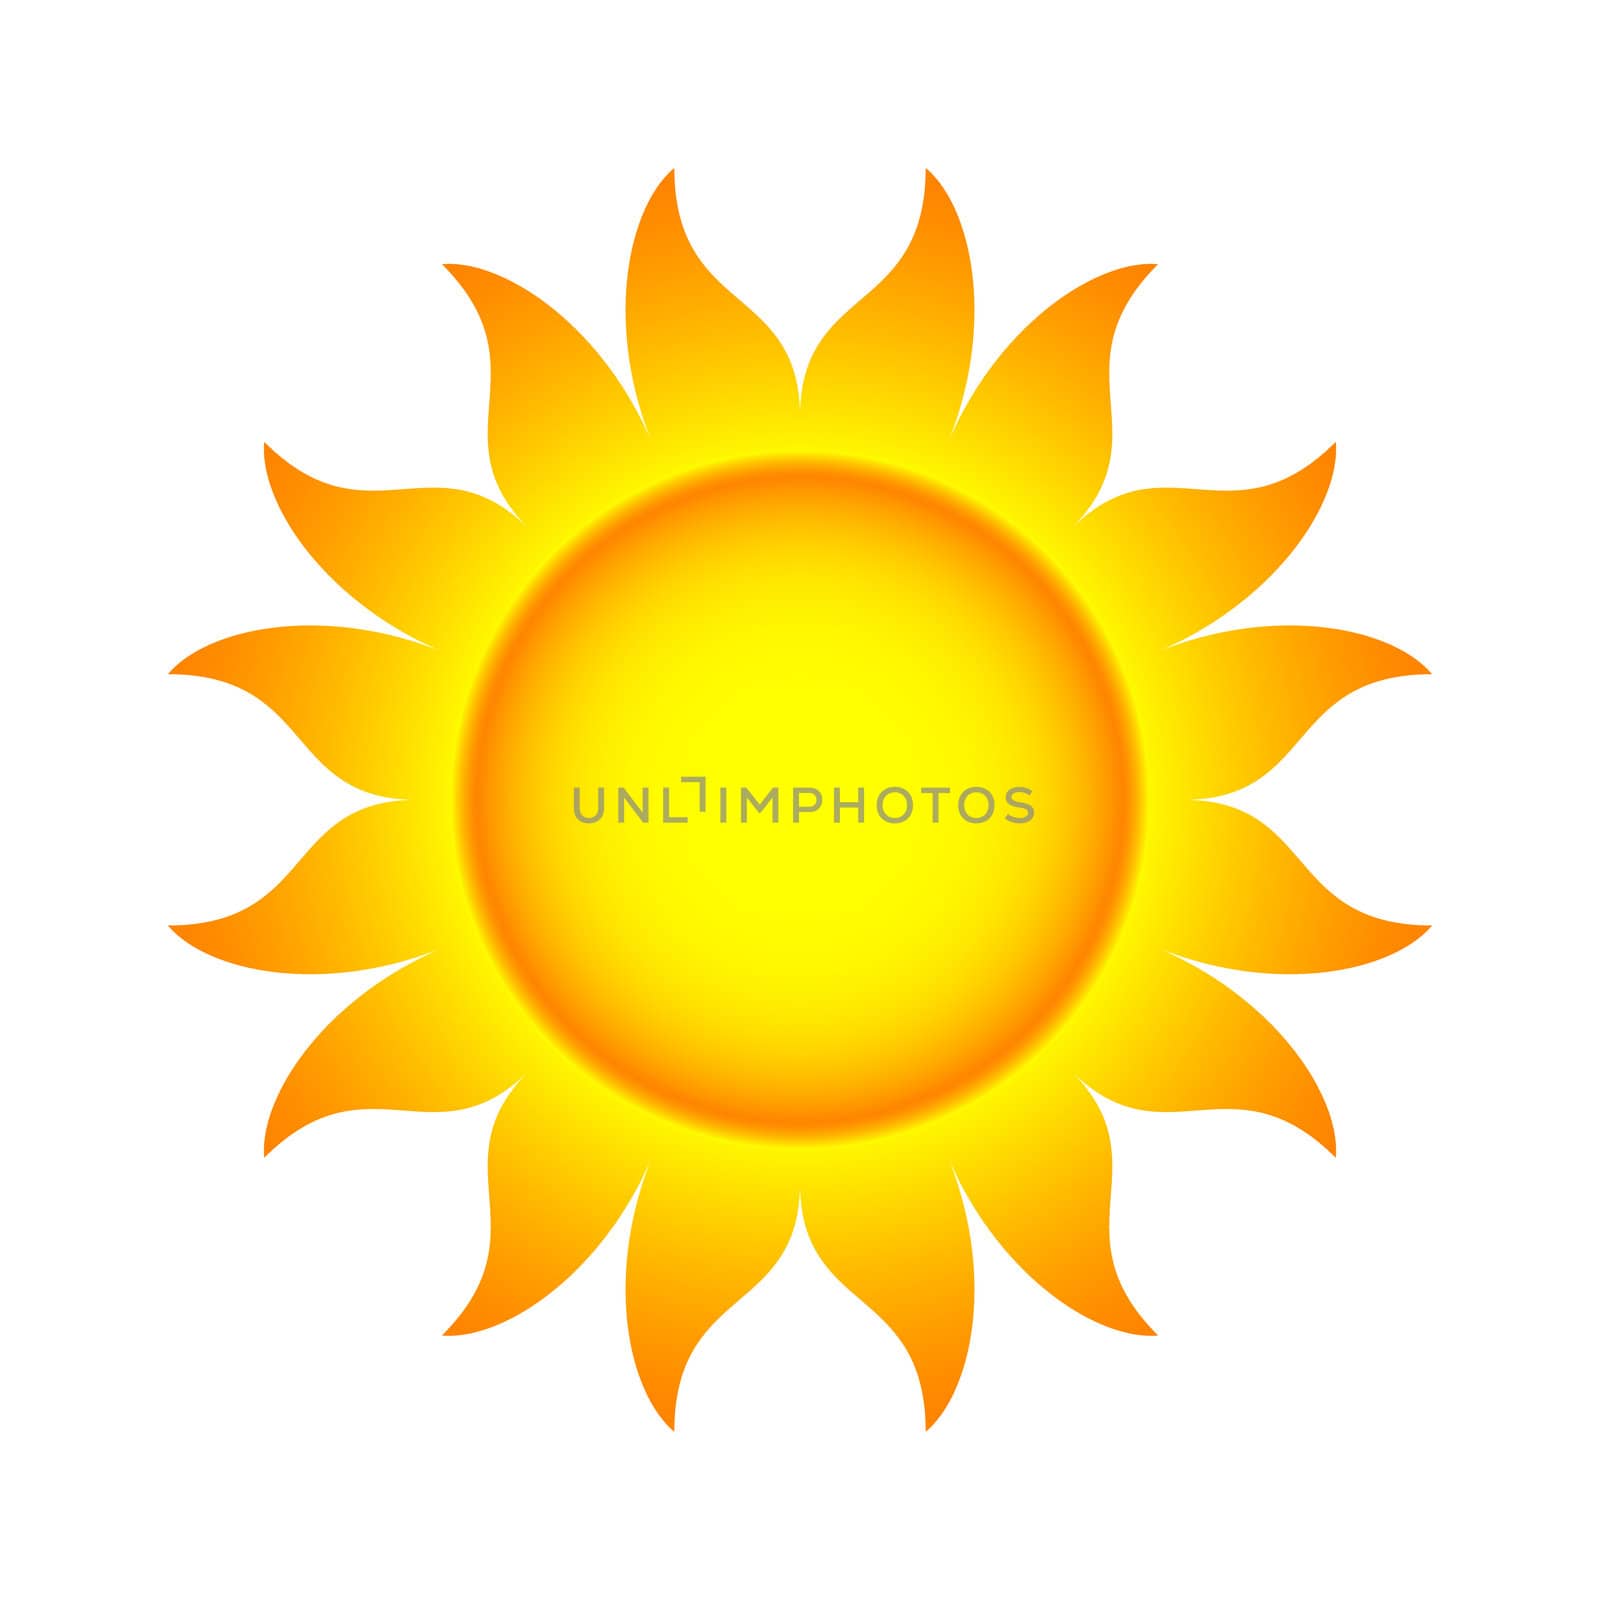 Bitmap Illustration of Abstract Sun With Flames (.jpg file has clipping path)